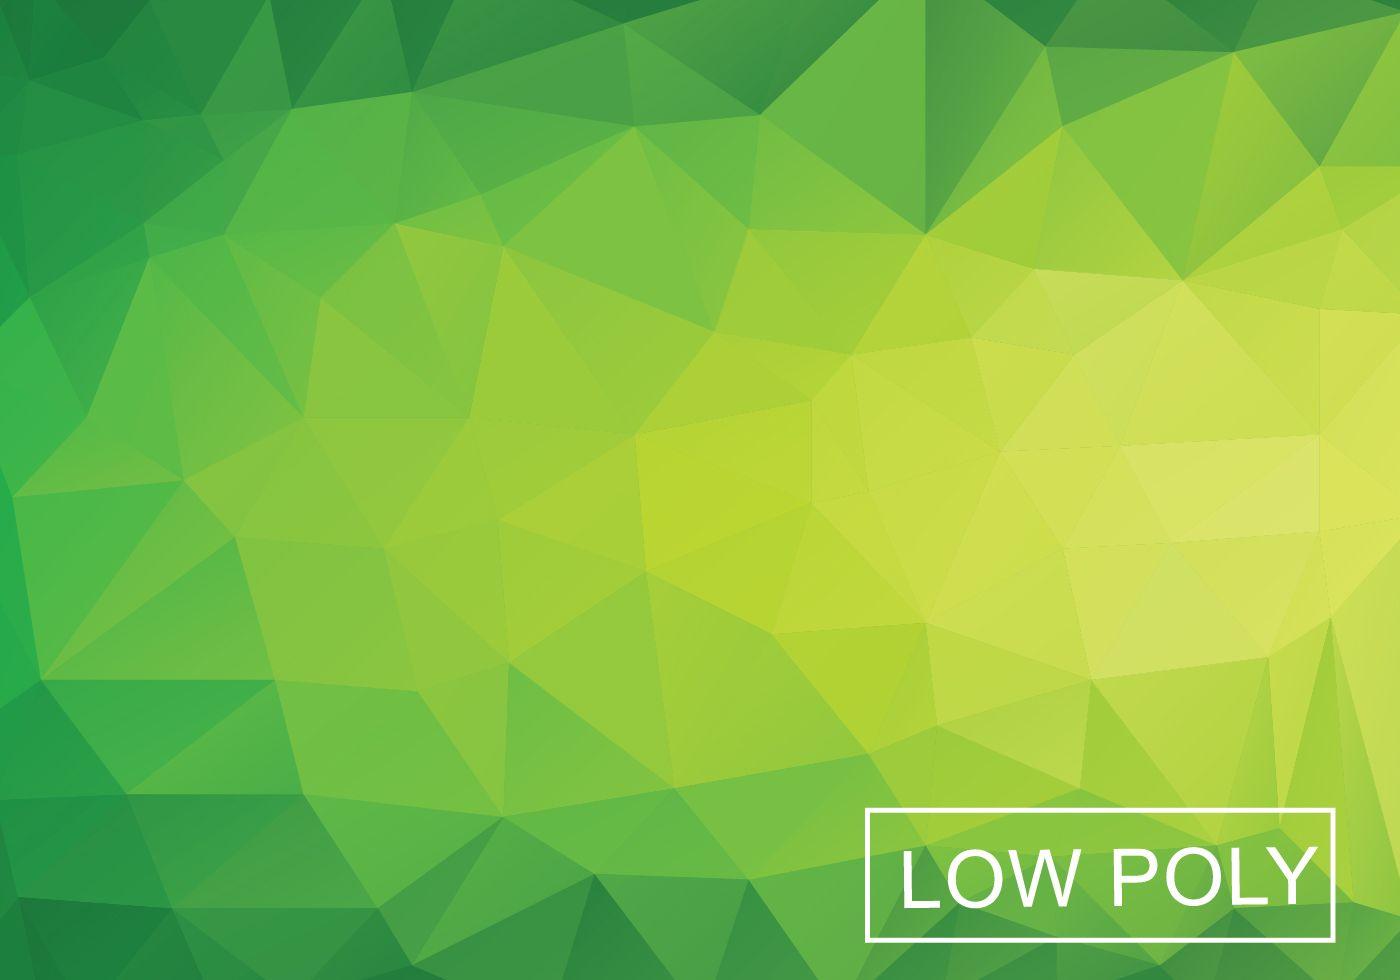 Green Background Free Vector Art - (37632 Free Downloads)